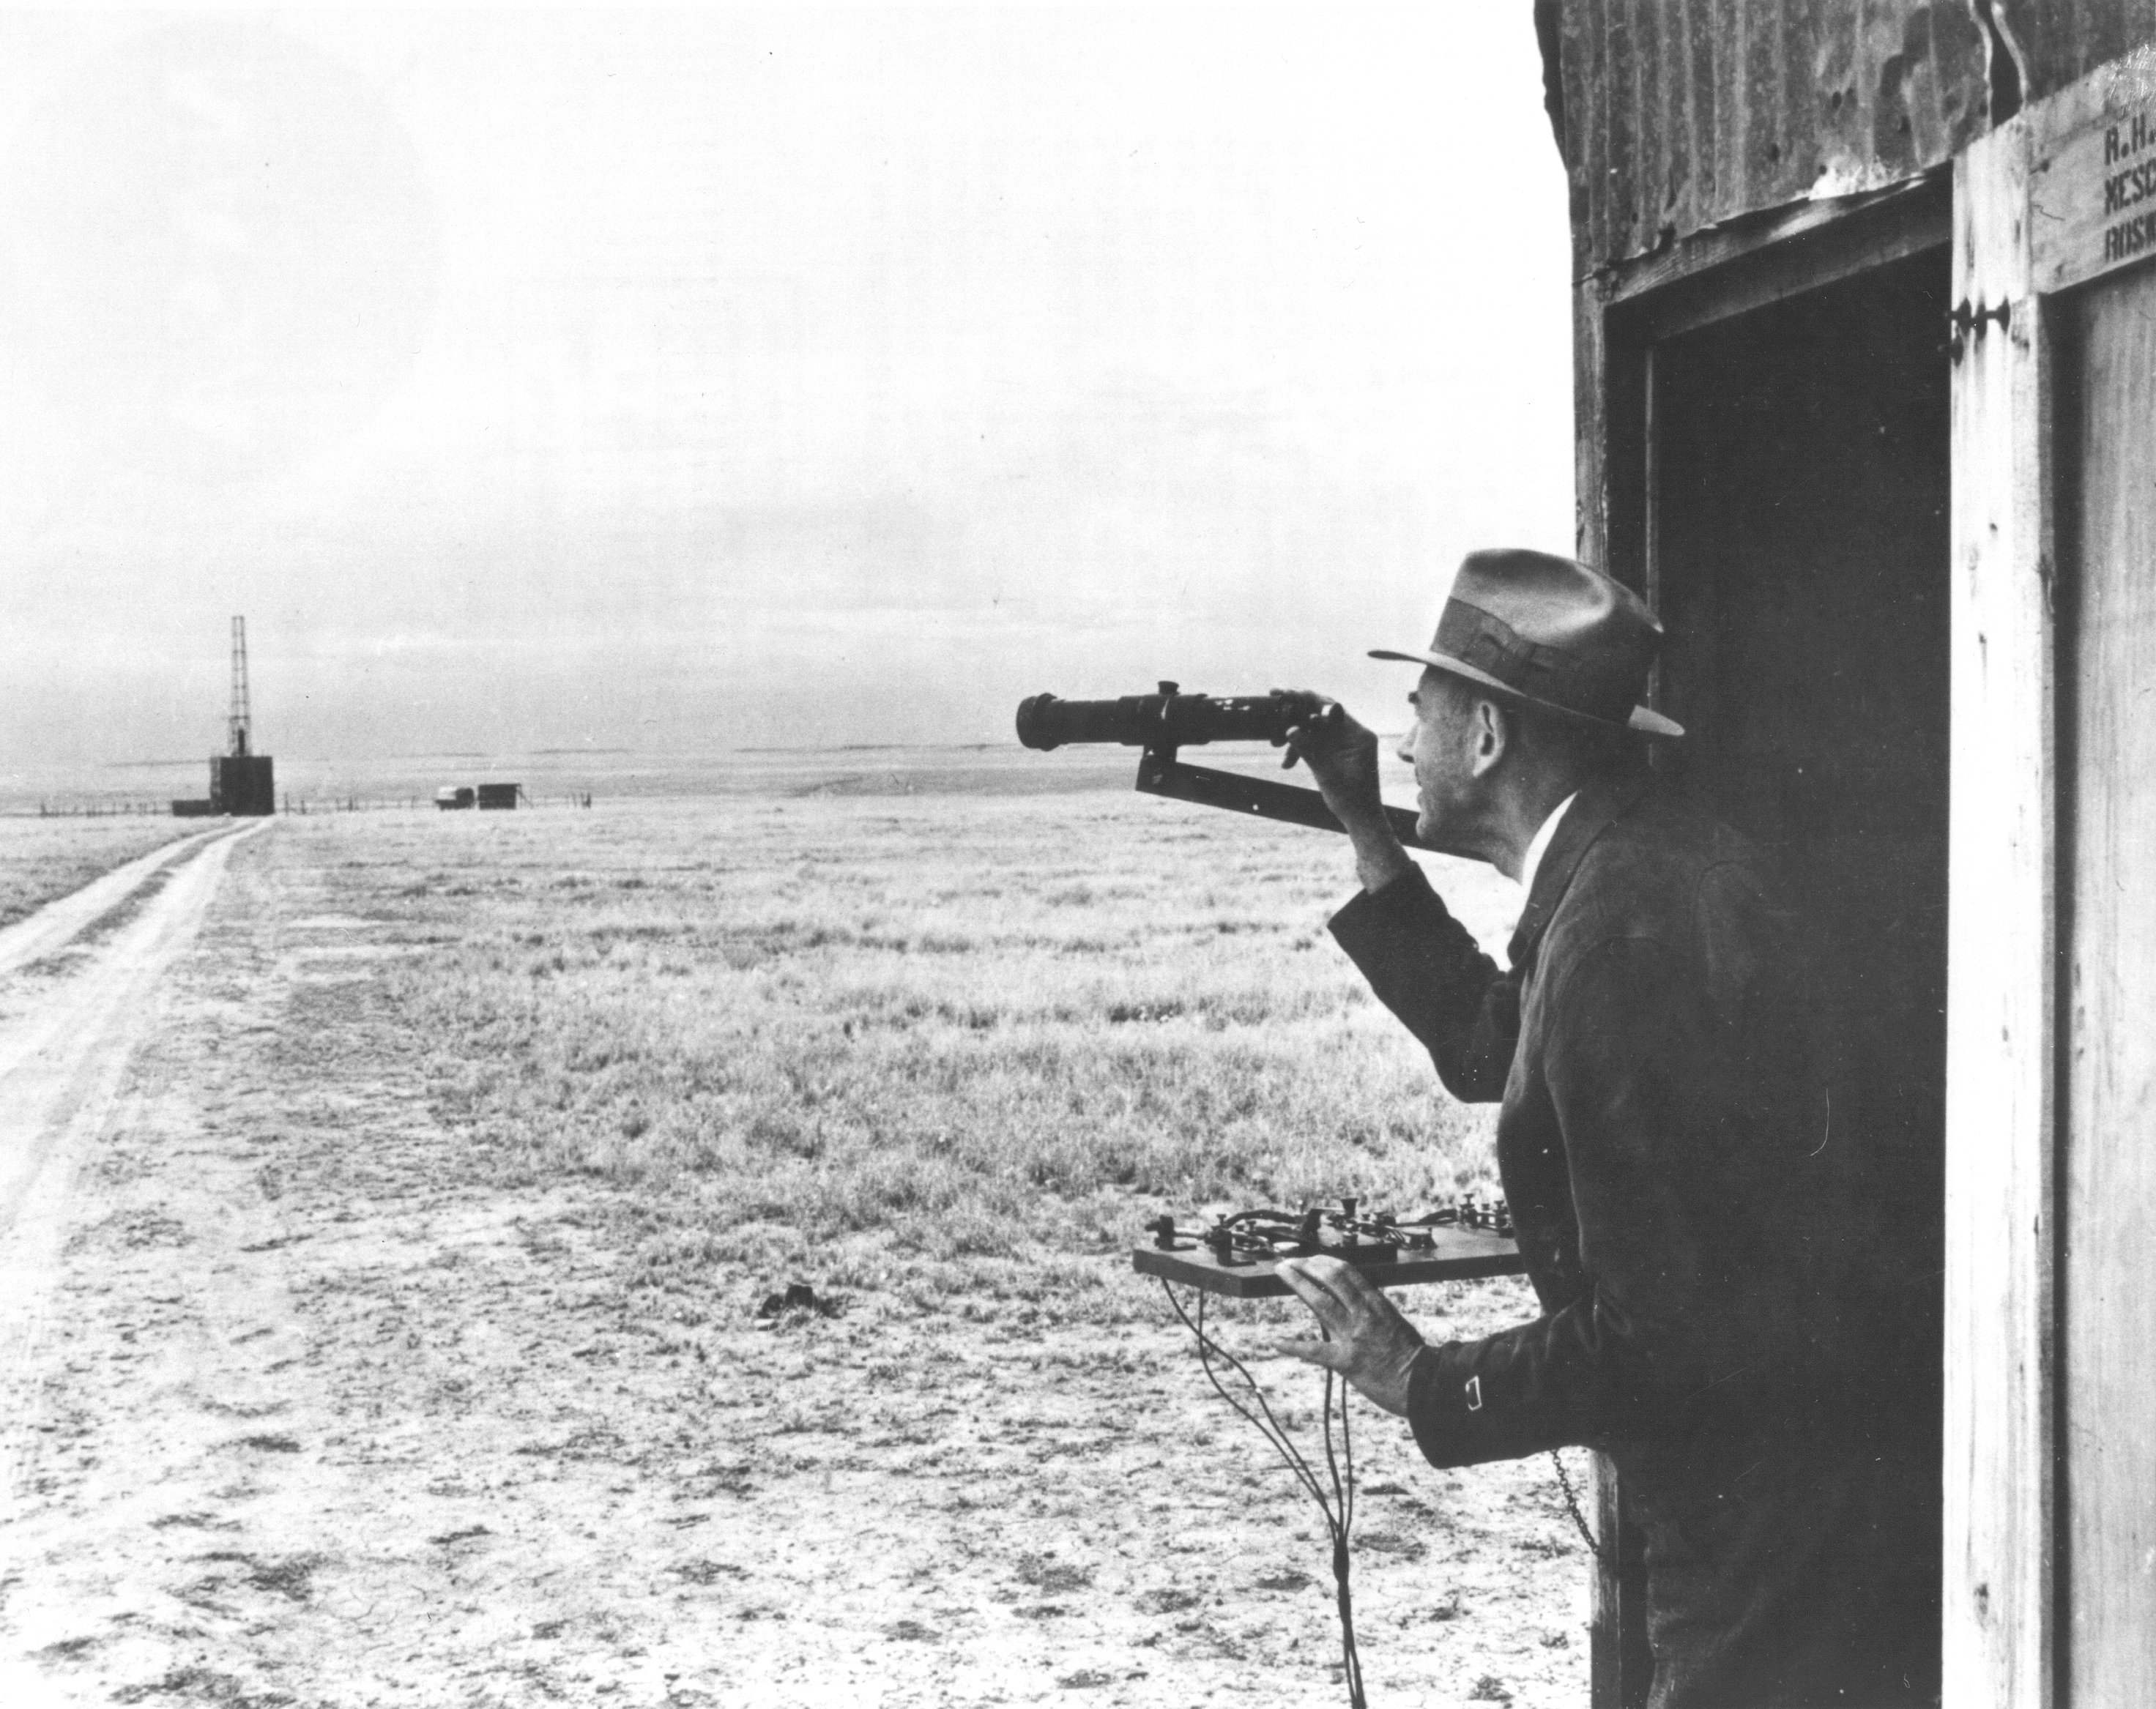 "Dr. Robert H. Goddard observes the launch site from his launch control shack while standing by the firing control panel. From here he can fire, release, or stop testing if firing was unsatisfactory. Firing, releasing, and stop keys are shown on panel. The rocket is situated in the launch tower." (NASA) 